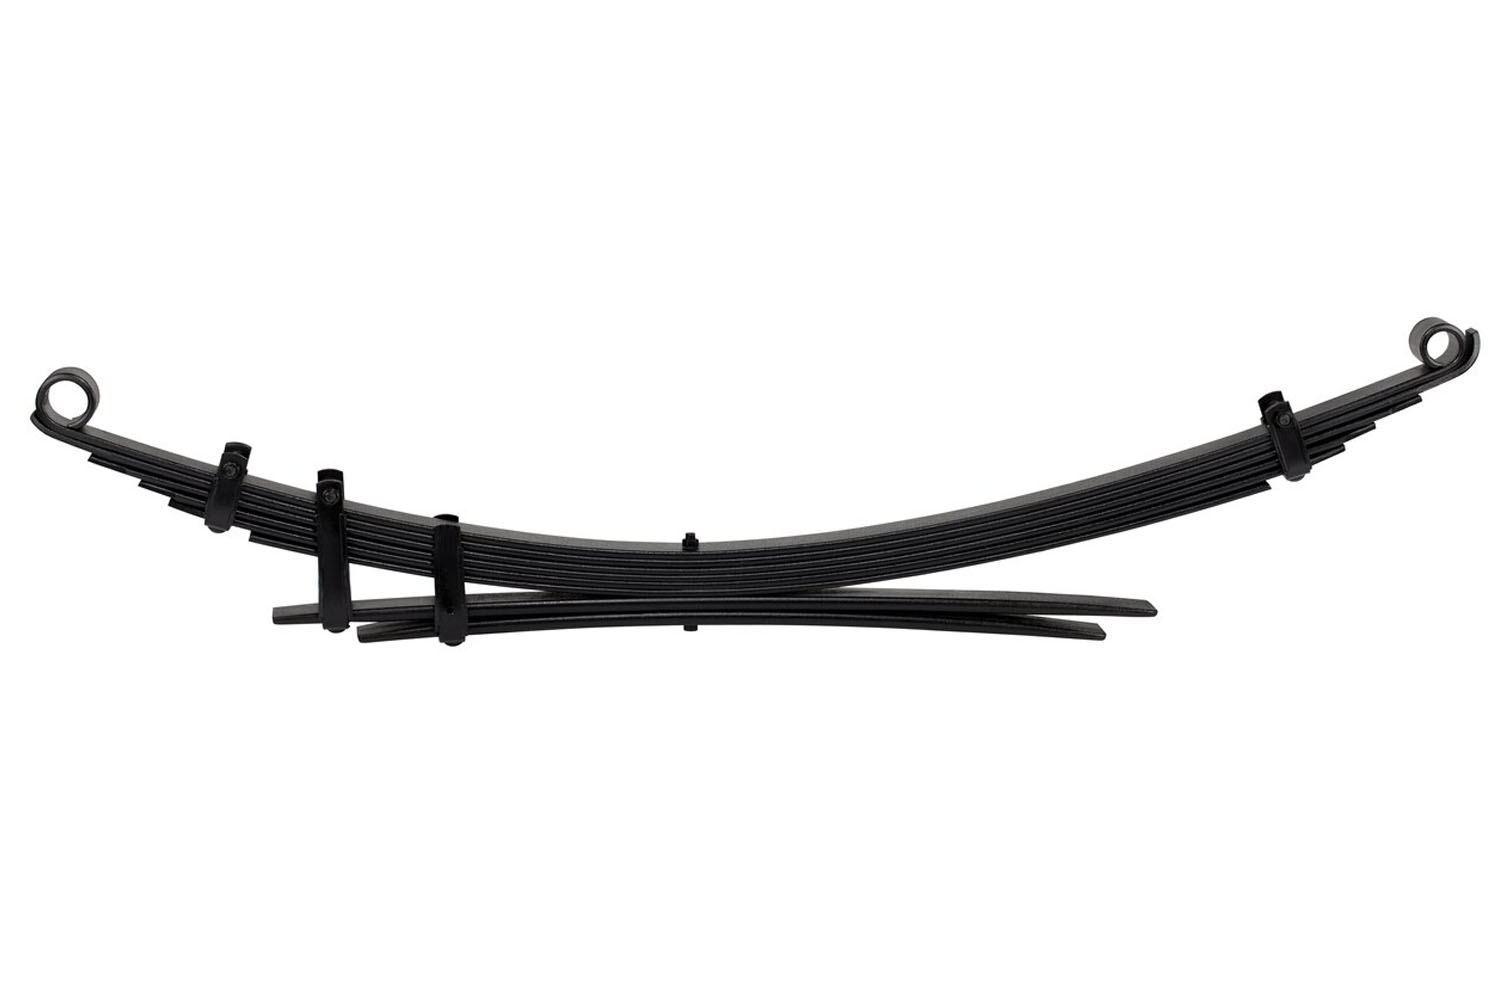 Rear Leaf Spring - Heavy Load (660LBS-GVM) Suited For 2005-15 Nissan Xterra Questions & Answers